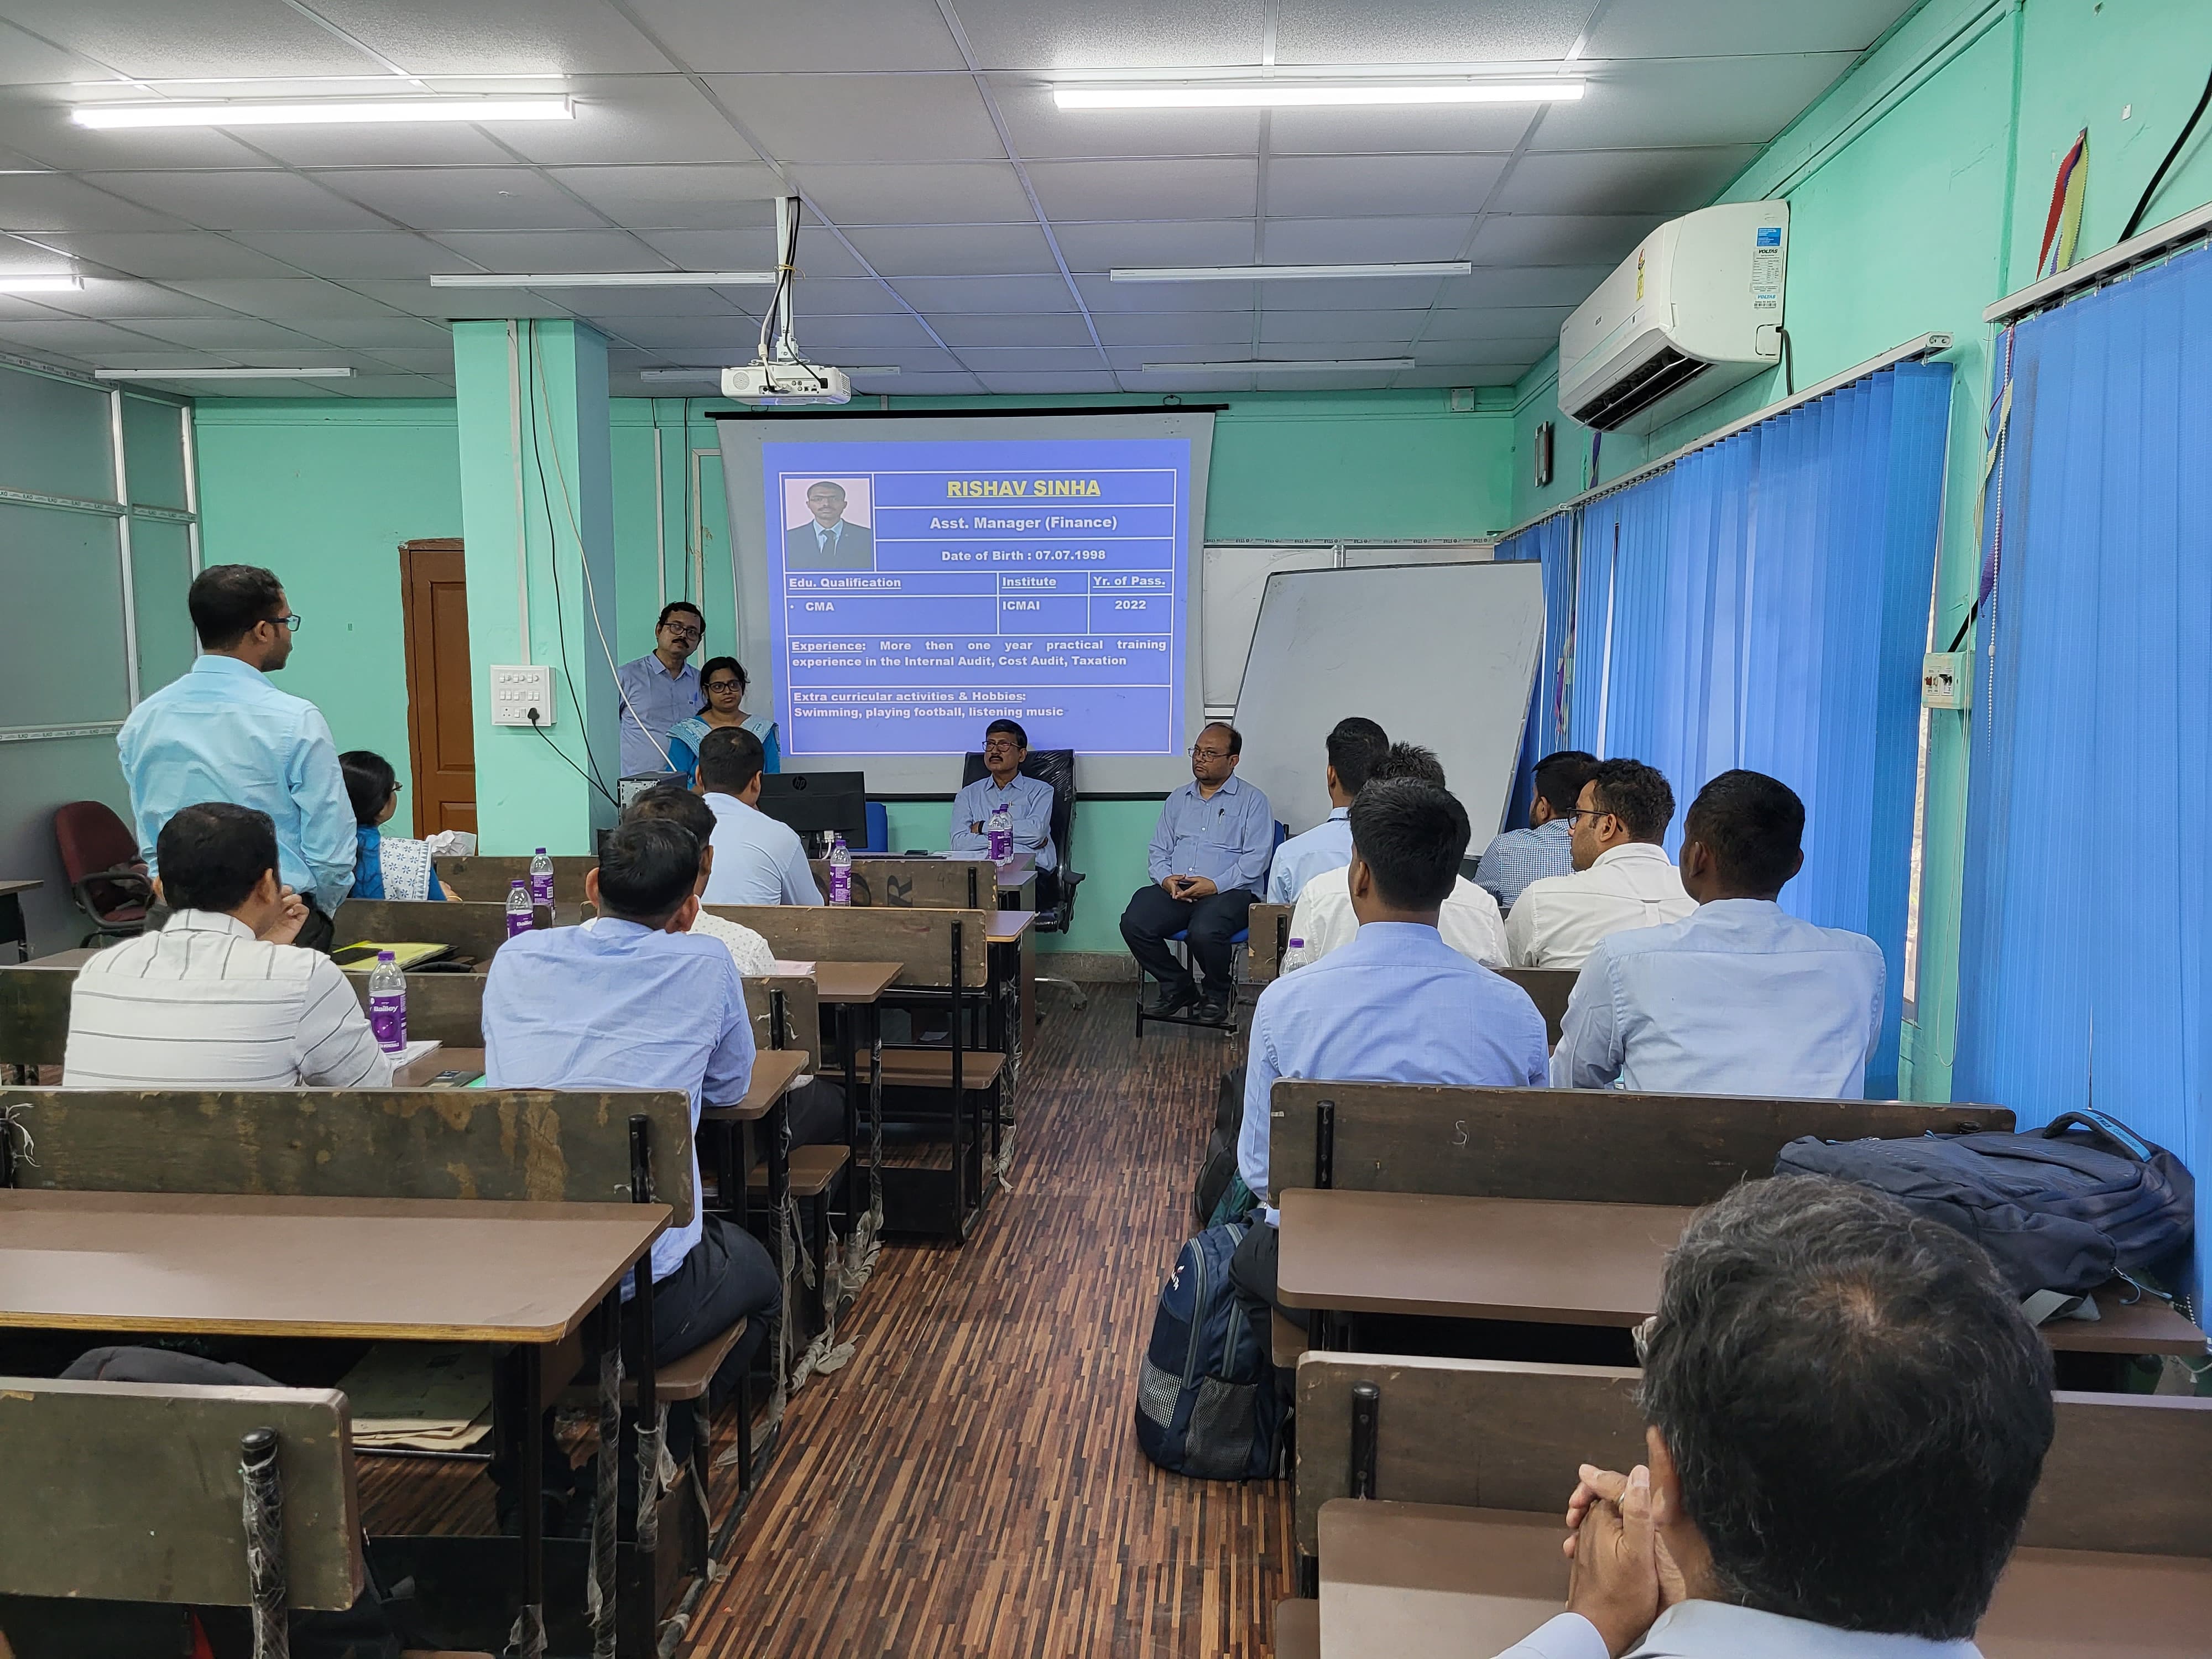 Three week Induction Program for newly inducted AMs & JMs inaugurated by Director (Personnel), GRSE on 02 Nov 23